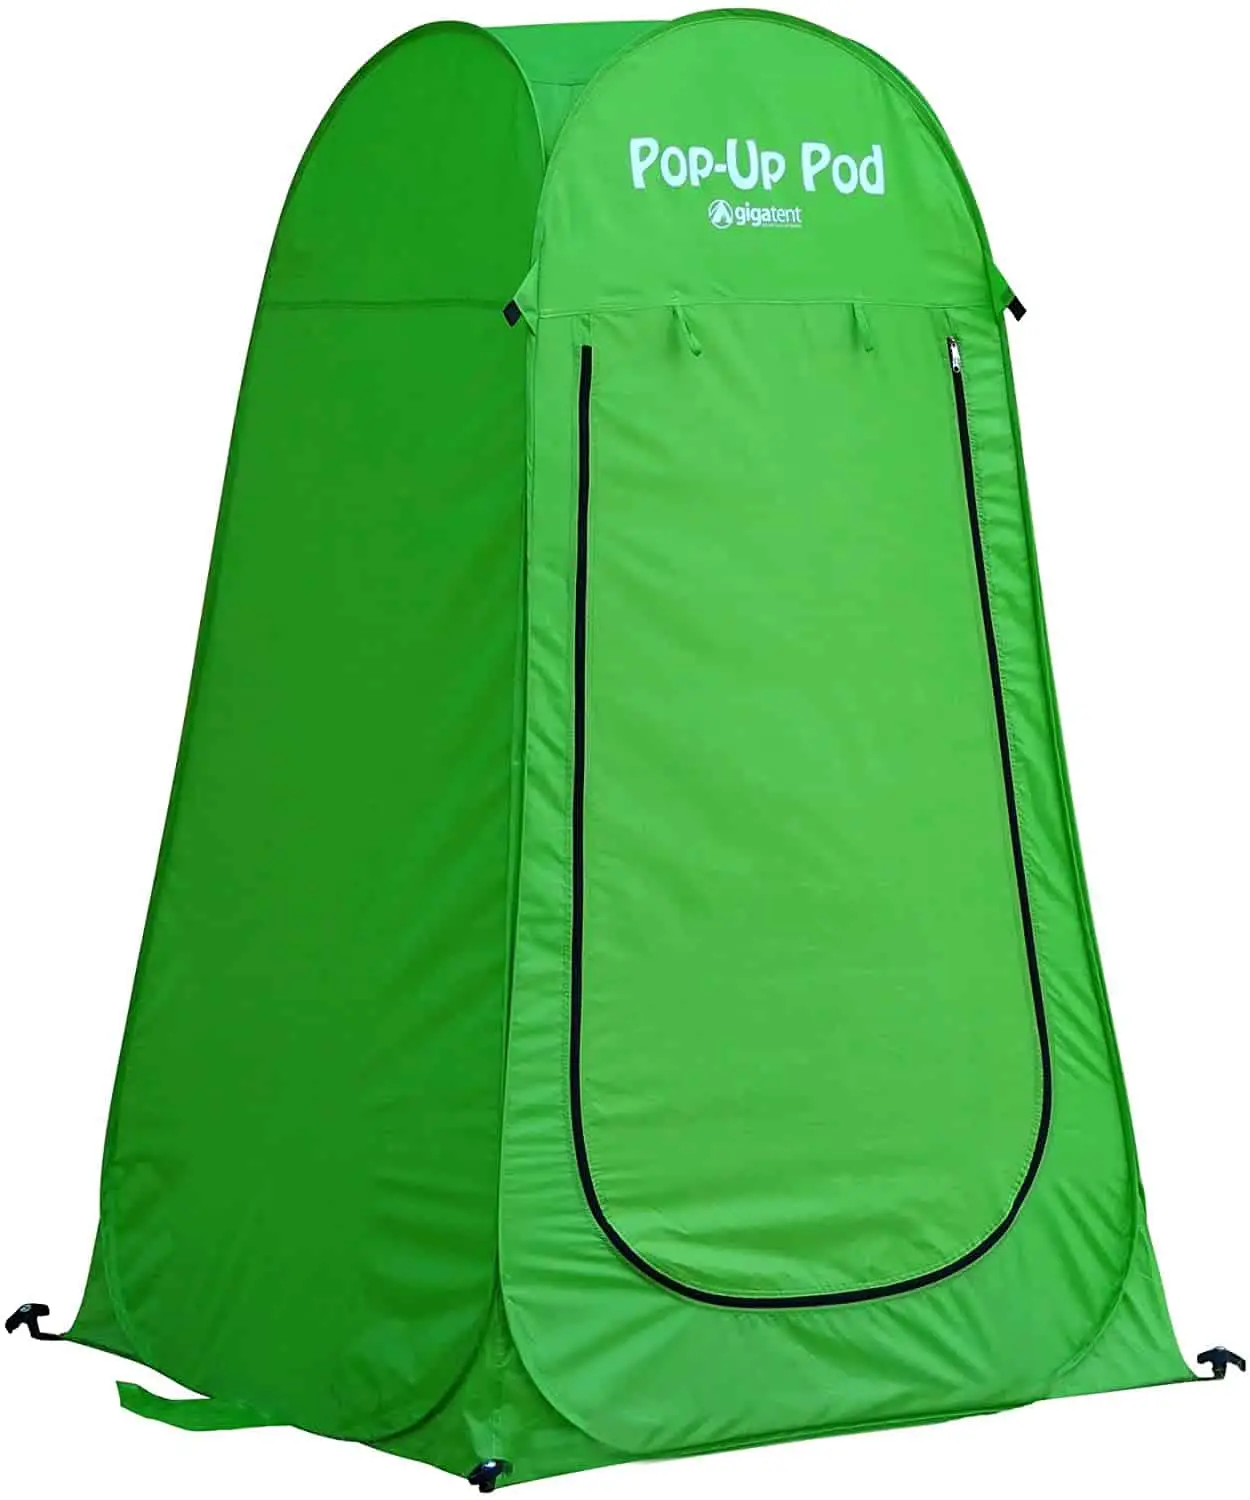 GigaTent Pop Up Pod Changing Room Privacy Tent – Instant Portable Outdoor Shower Tent, Camp Toilet, Rain Shelter for Camping & Beach –...